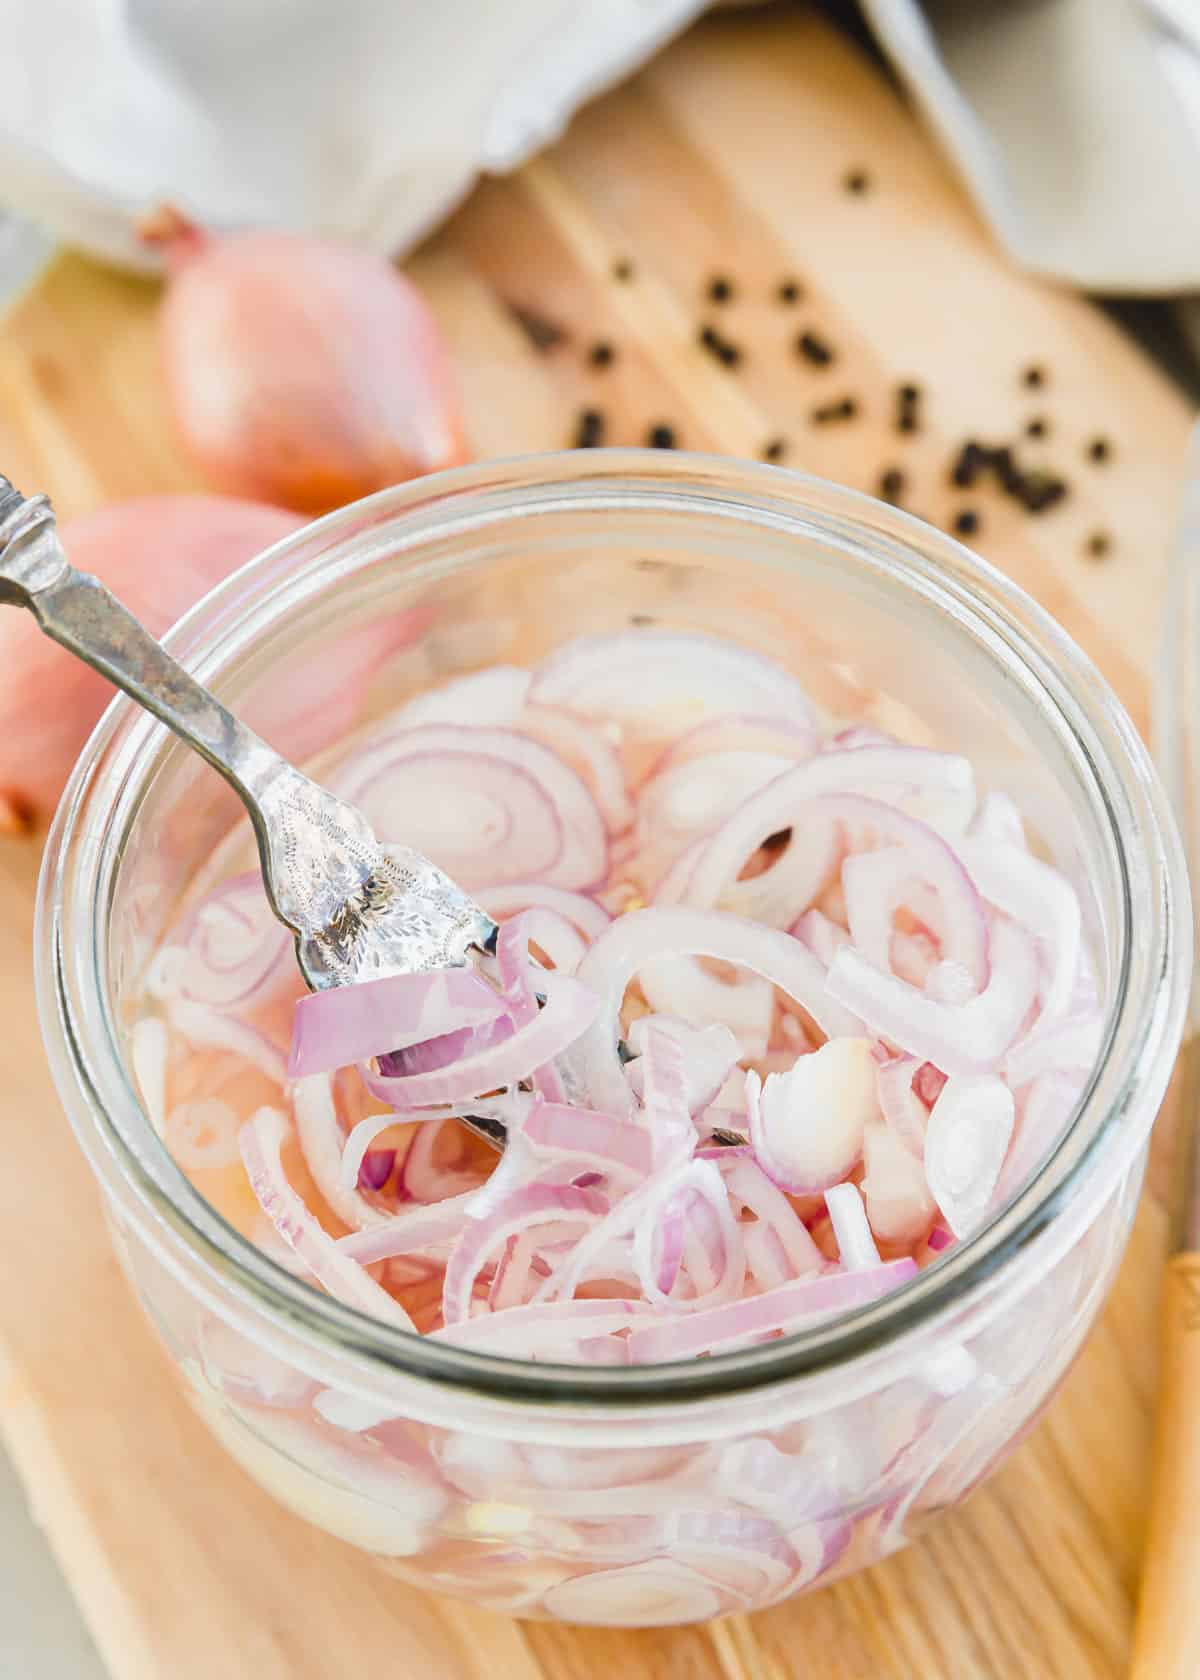 Pickled shallot recipe with peppercorns in a glass jar with a fork.